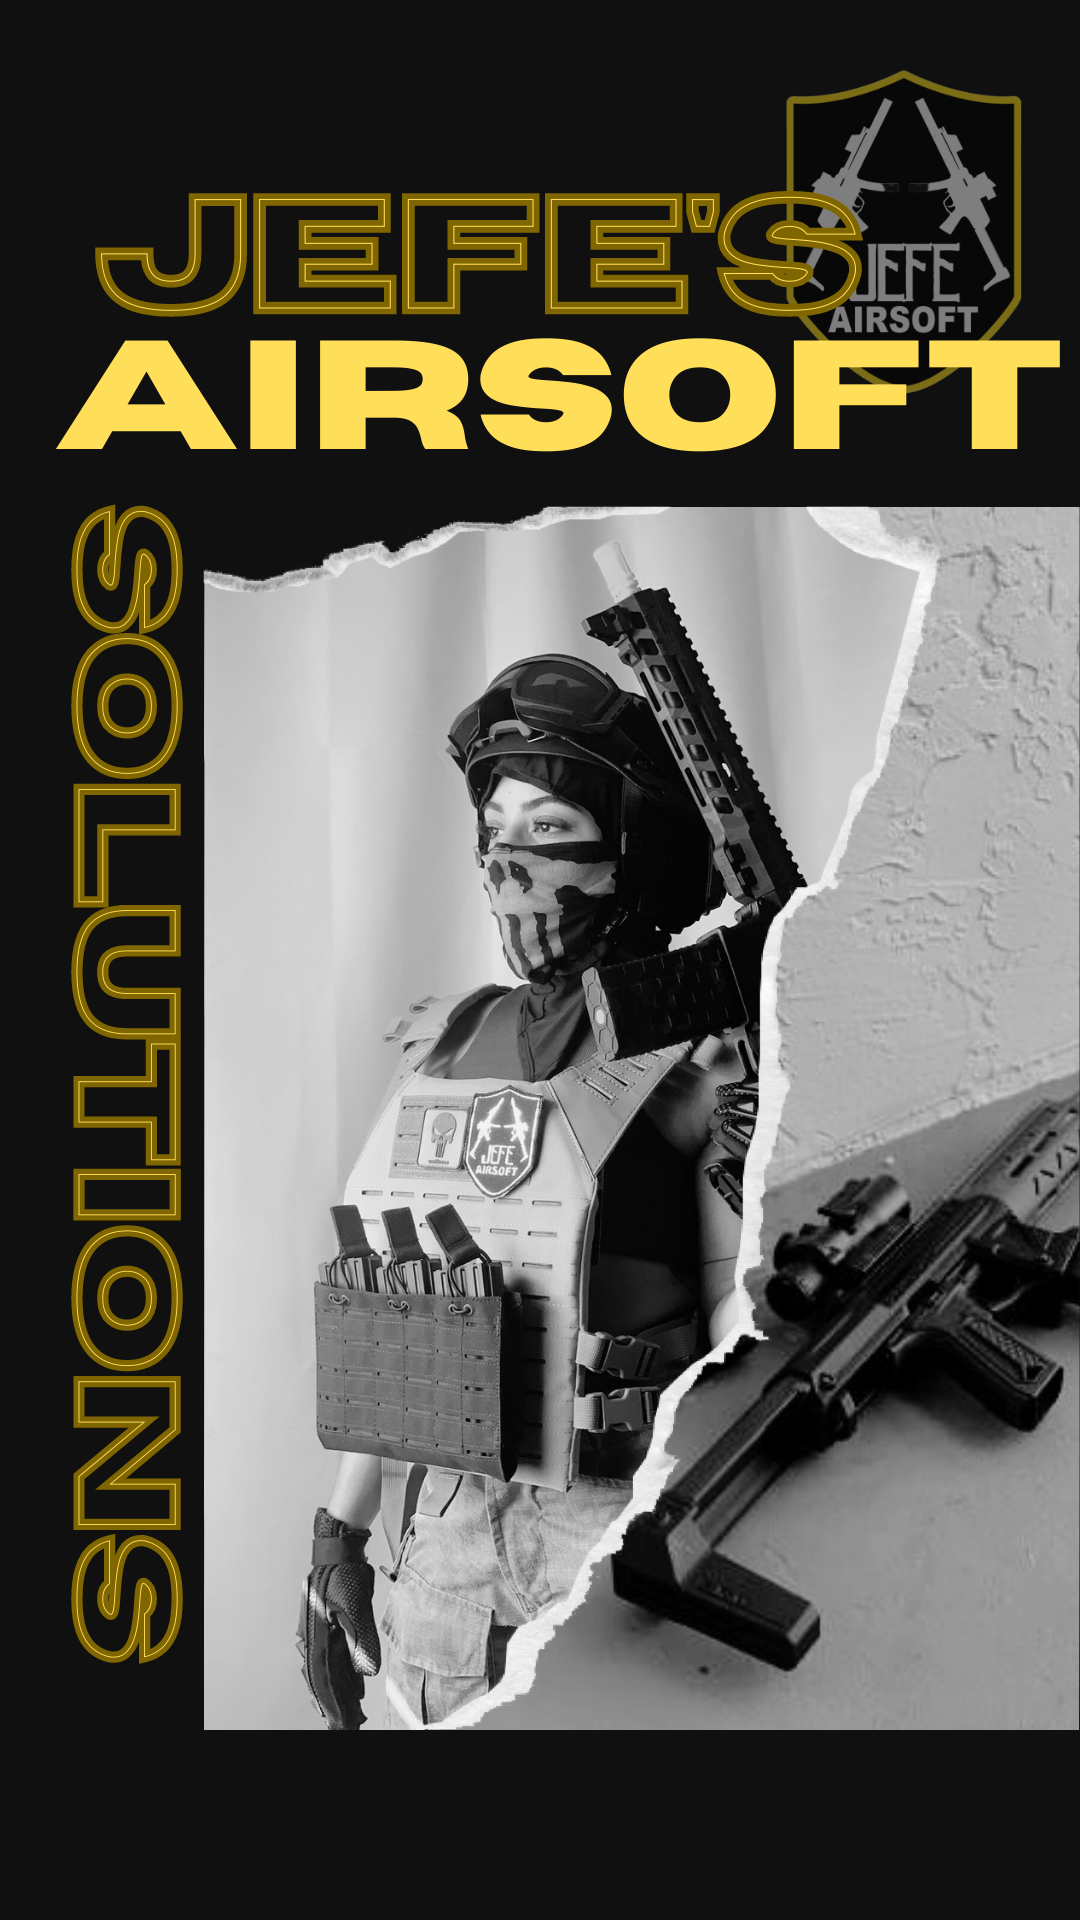 Jefe's Airsoft Solutions: Reinventing Your Airsoft Experience